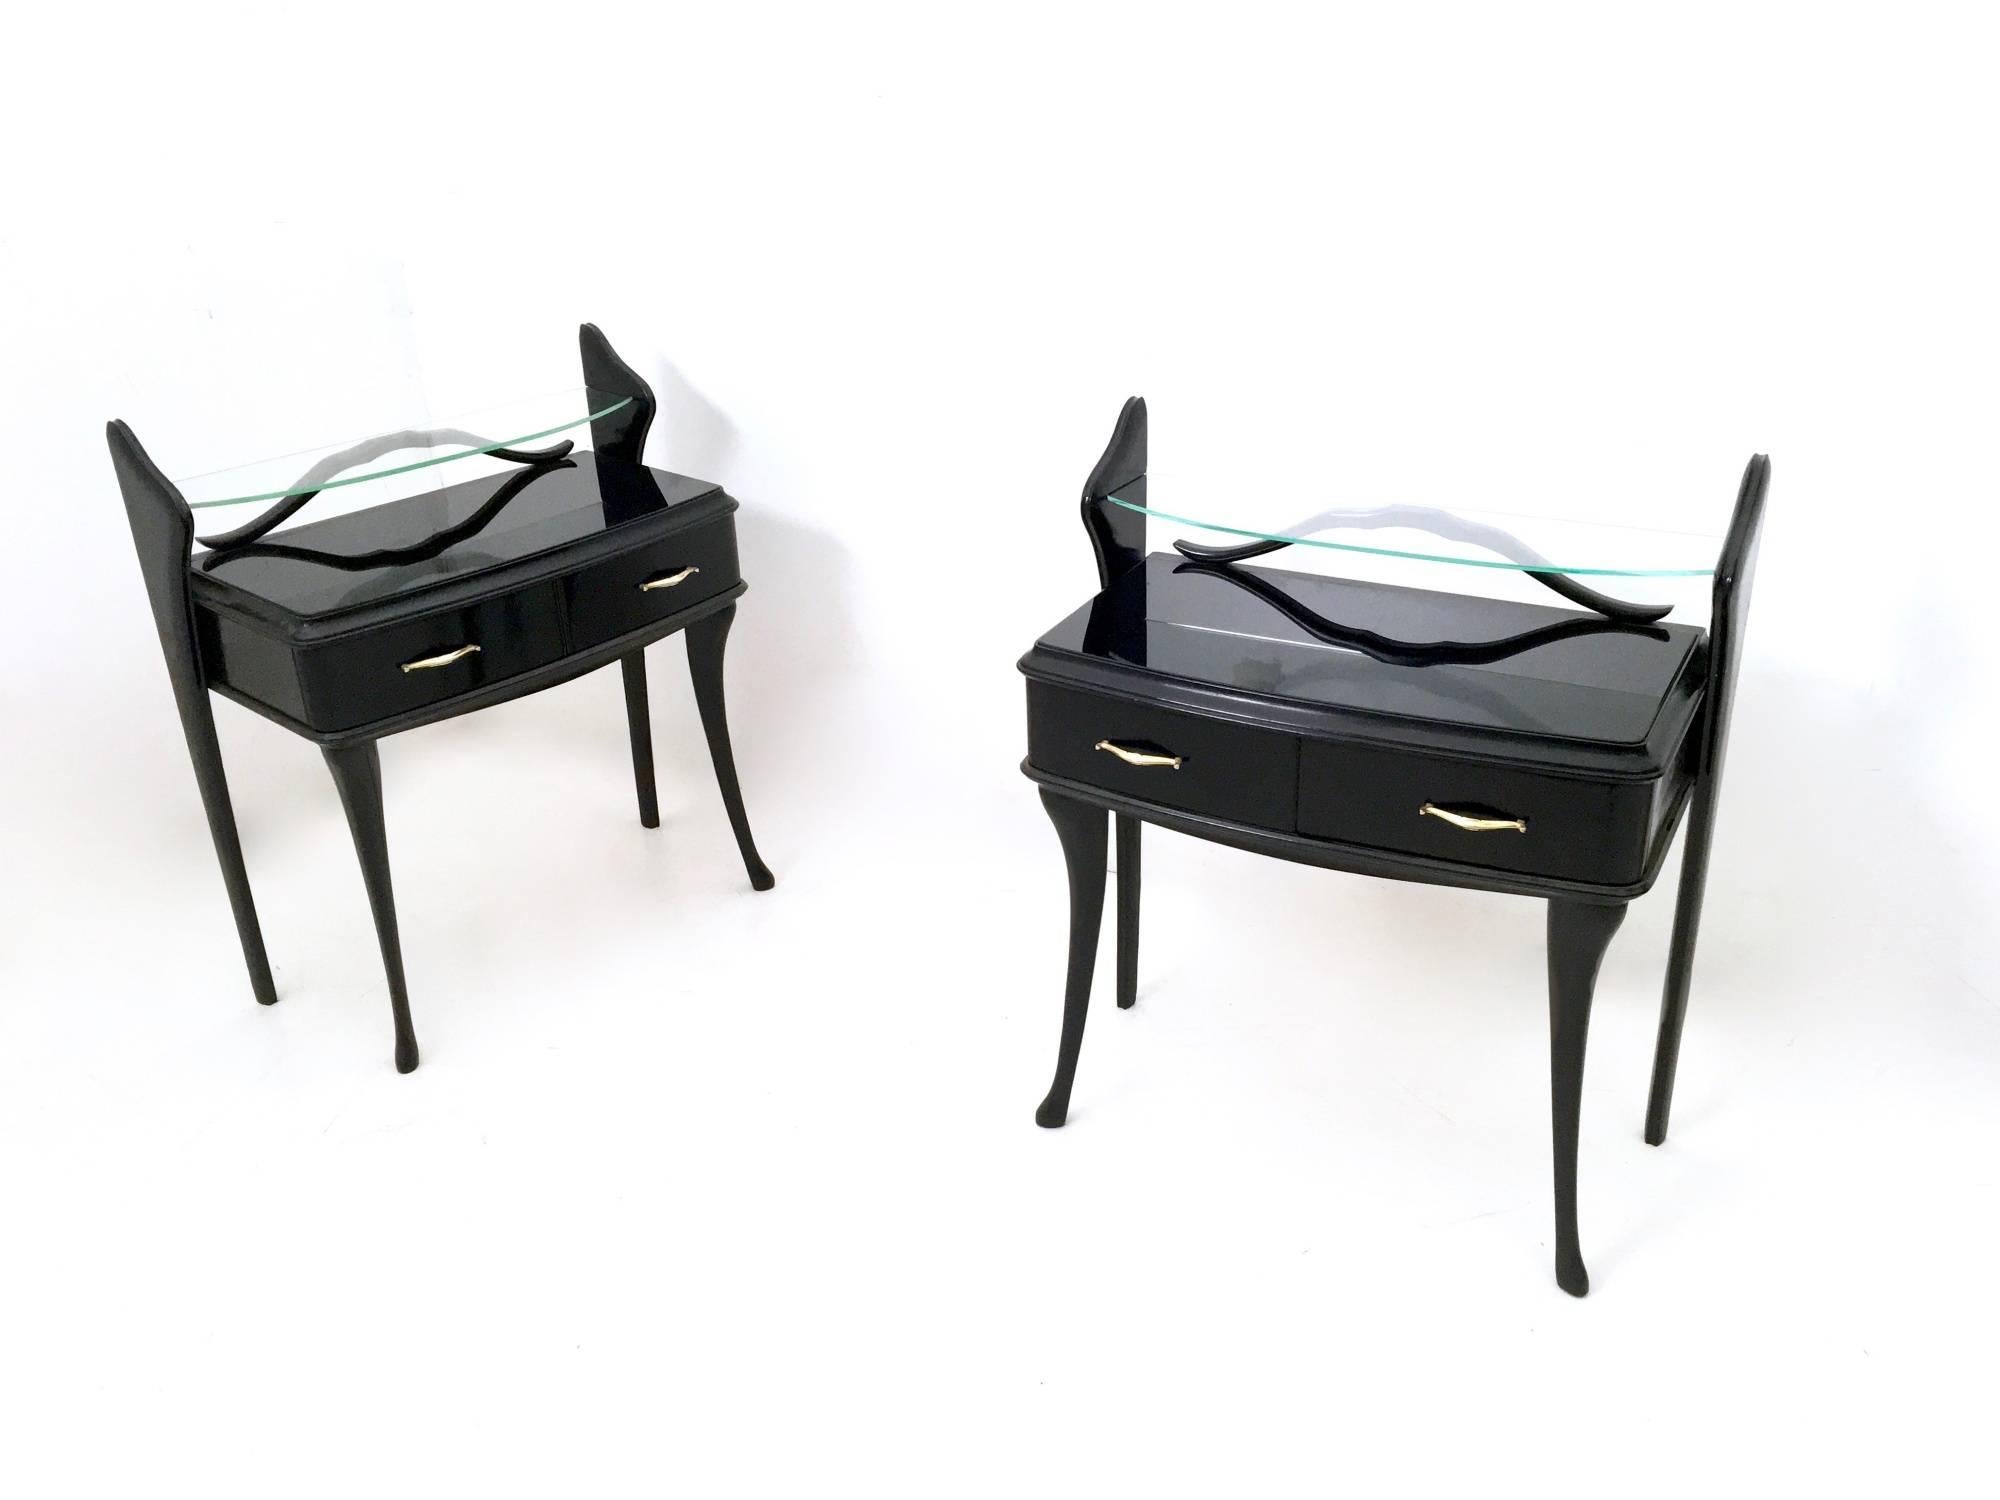 Made in Italy, 1950s.
These stunning nightstands feature a black lacquered beech frame, a glass shelf and a back-painted glass top.
They are vintage, therefore they might show slight traces of use, but since they have been recently restored they